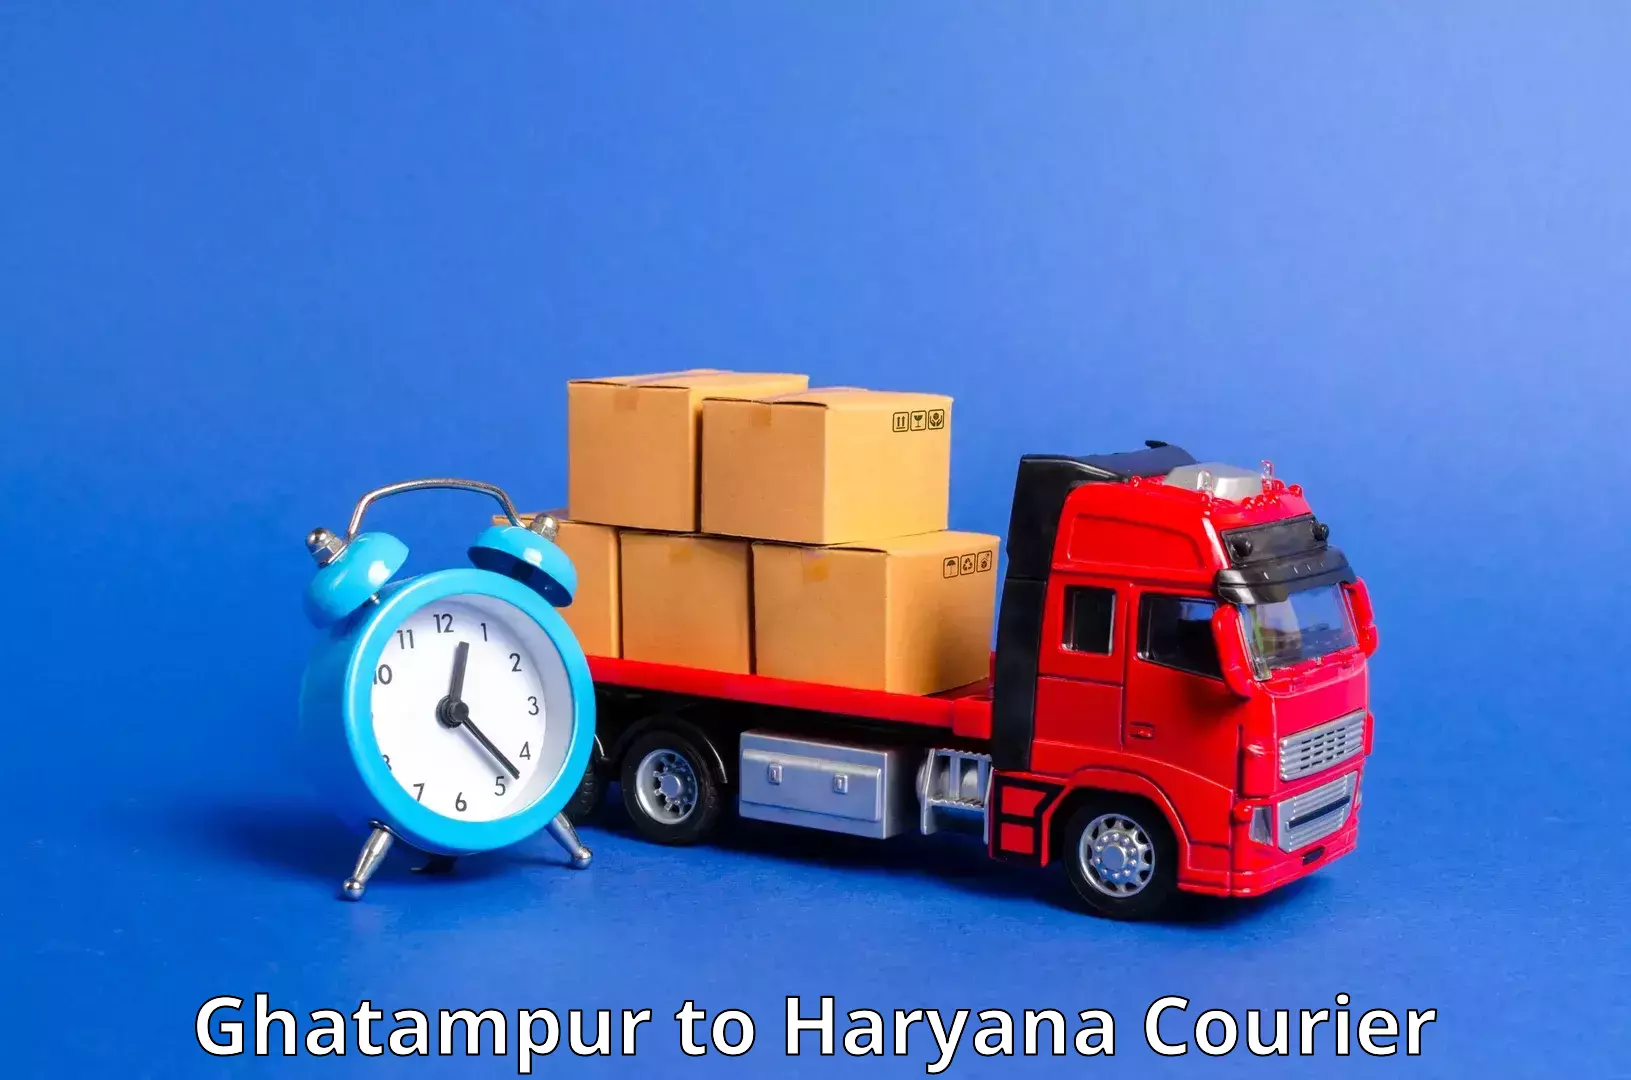 Comprehensive freight services in Ghatampur to Gurugram